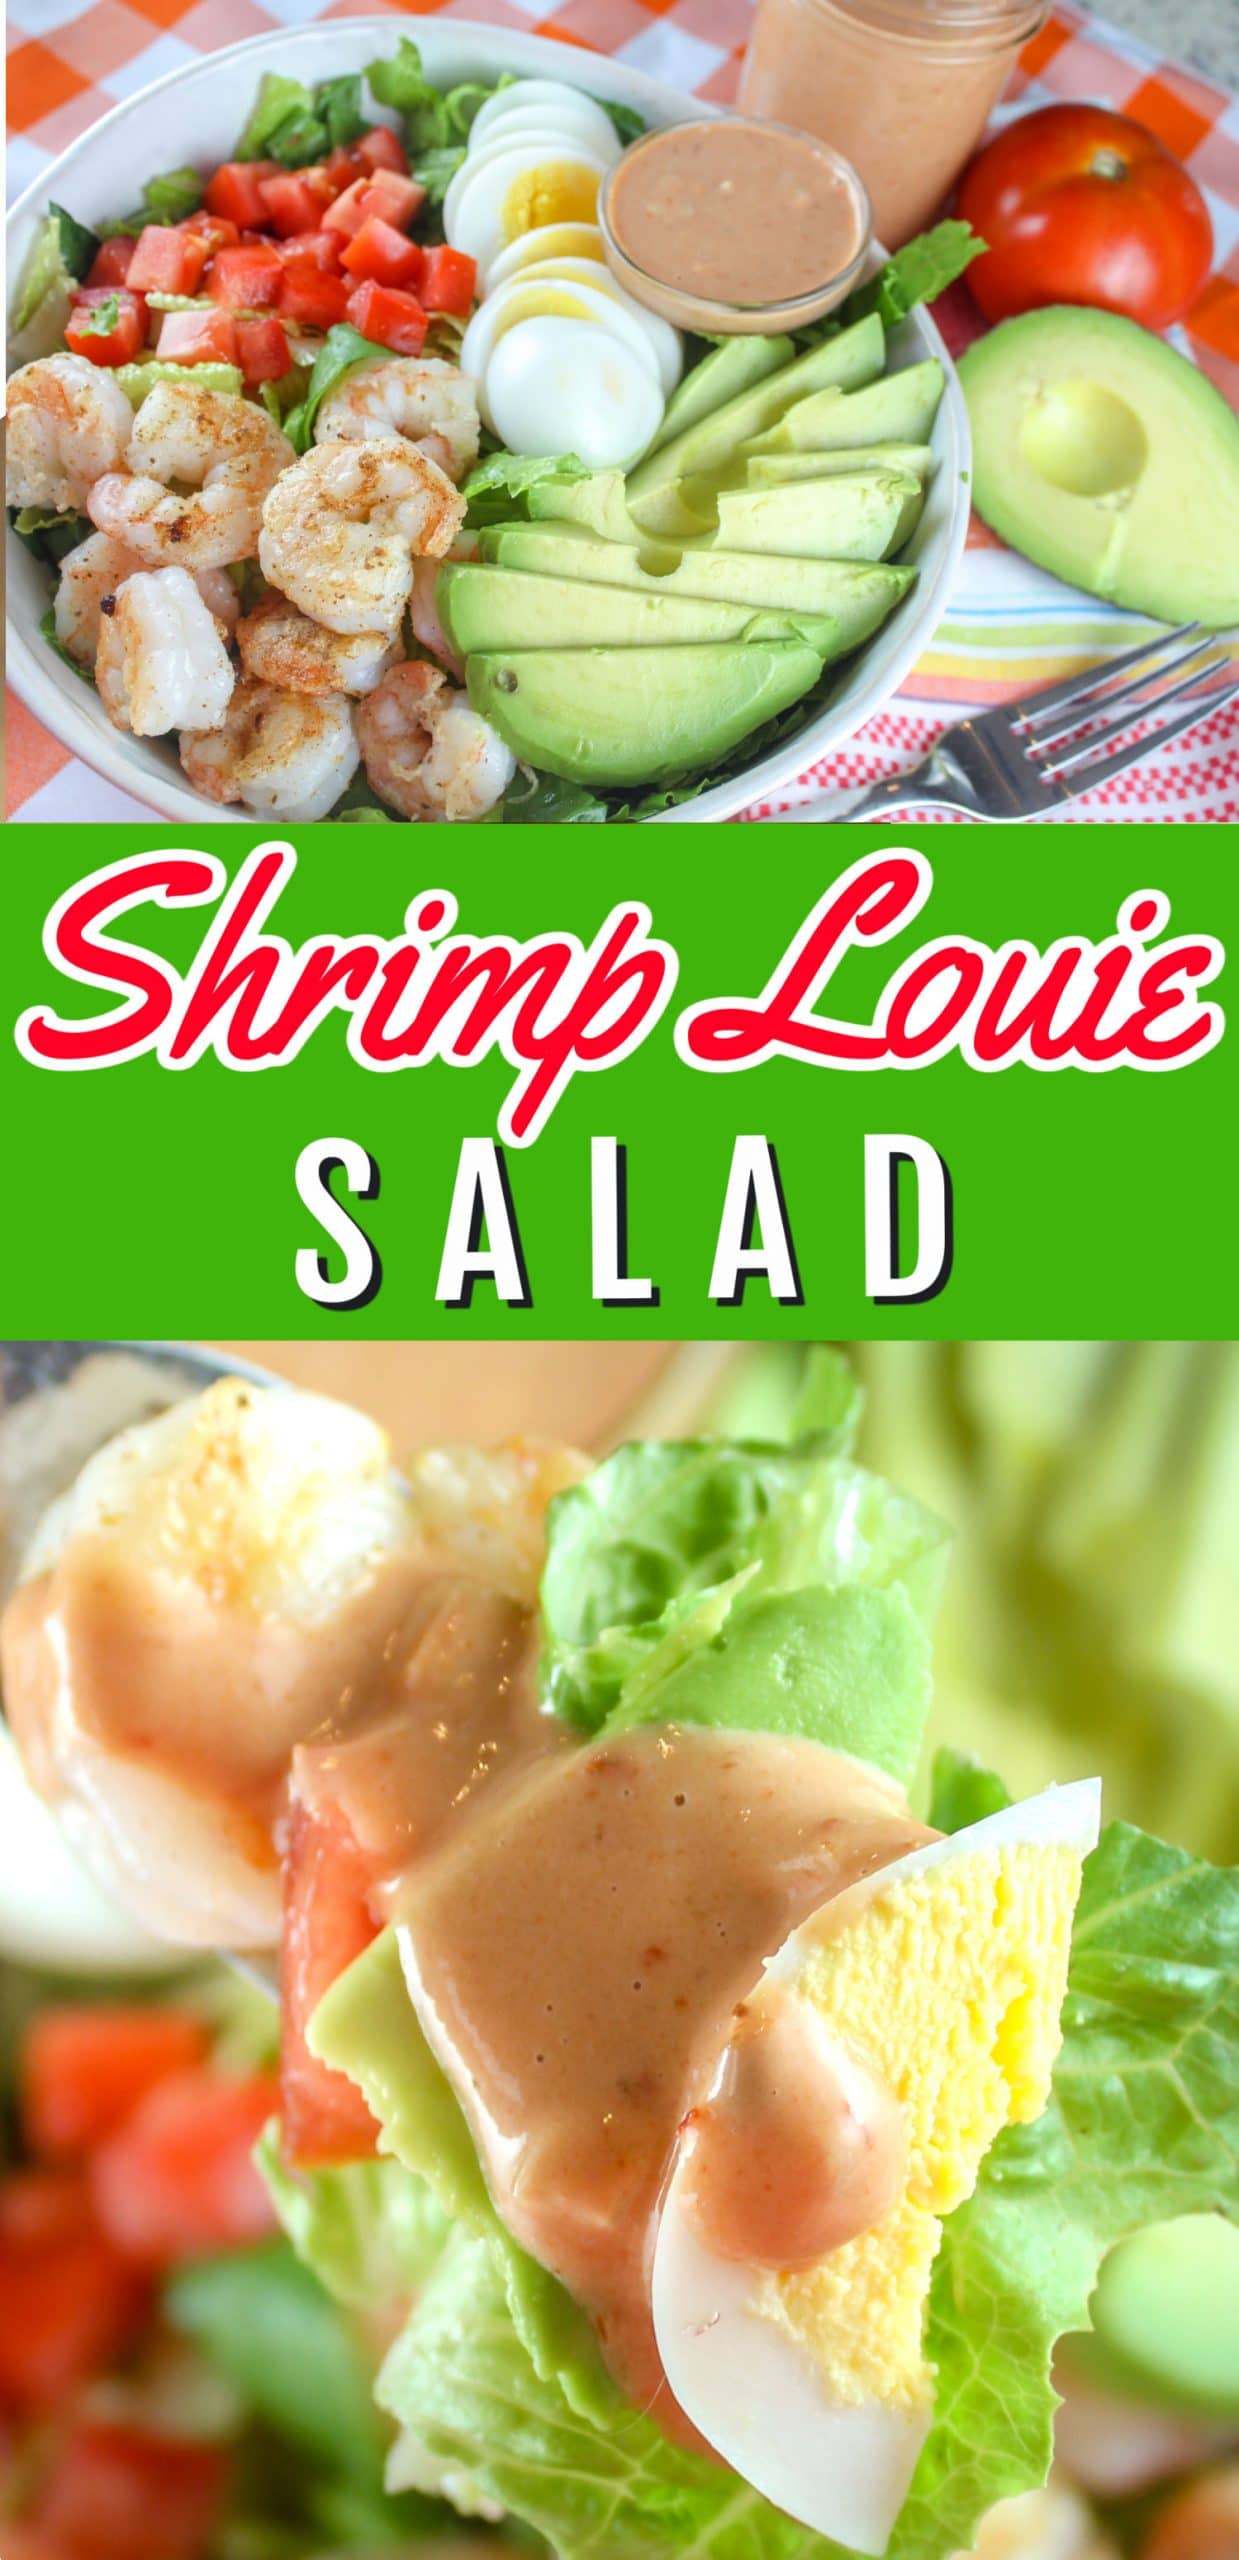 Shrimp Louie is a salad you'll often find in California made with shrimp, lettuce, egg, avocado and tomato. The simple dressing is similar to Thousand Island dressing and super tasty! via @foodhussy